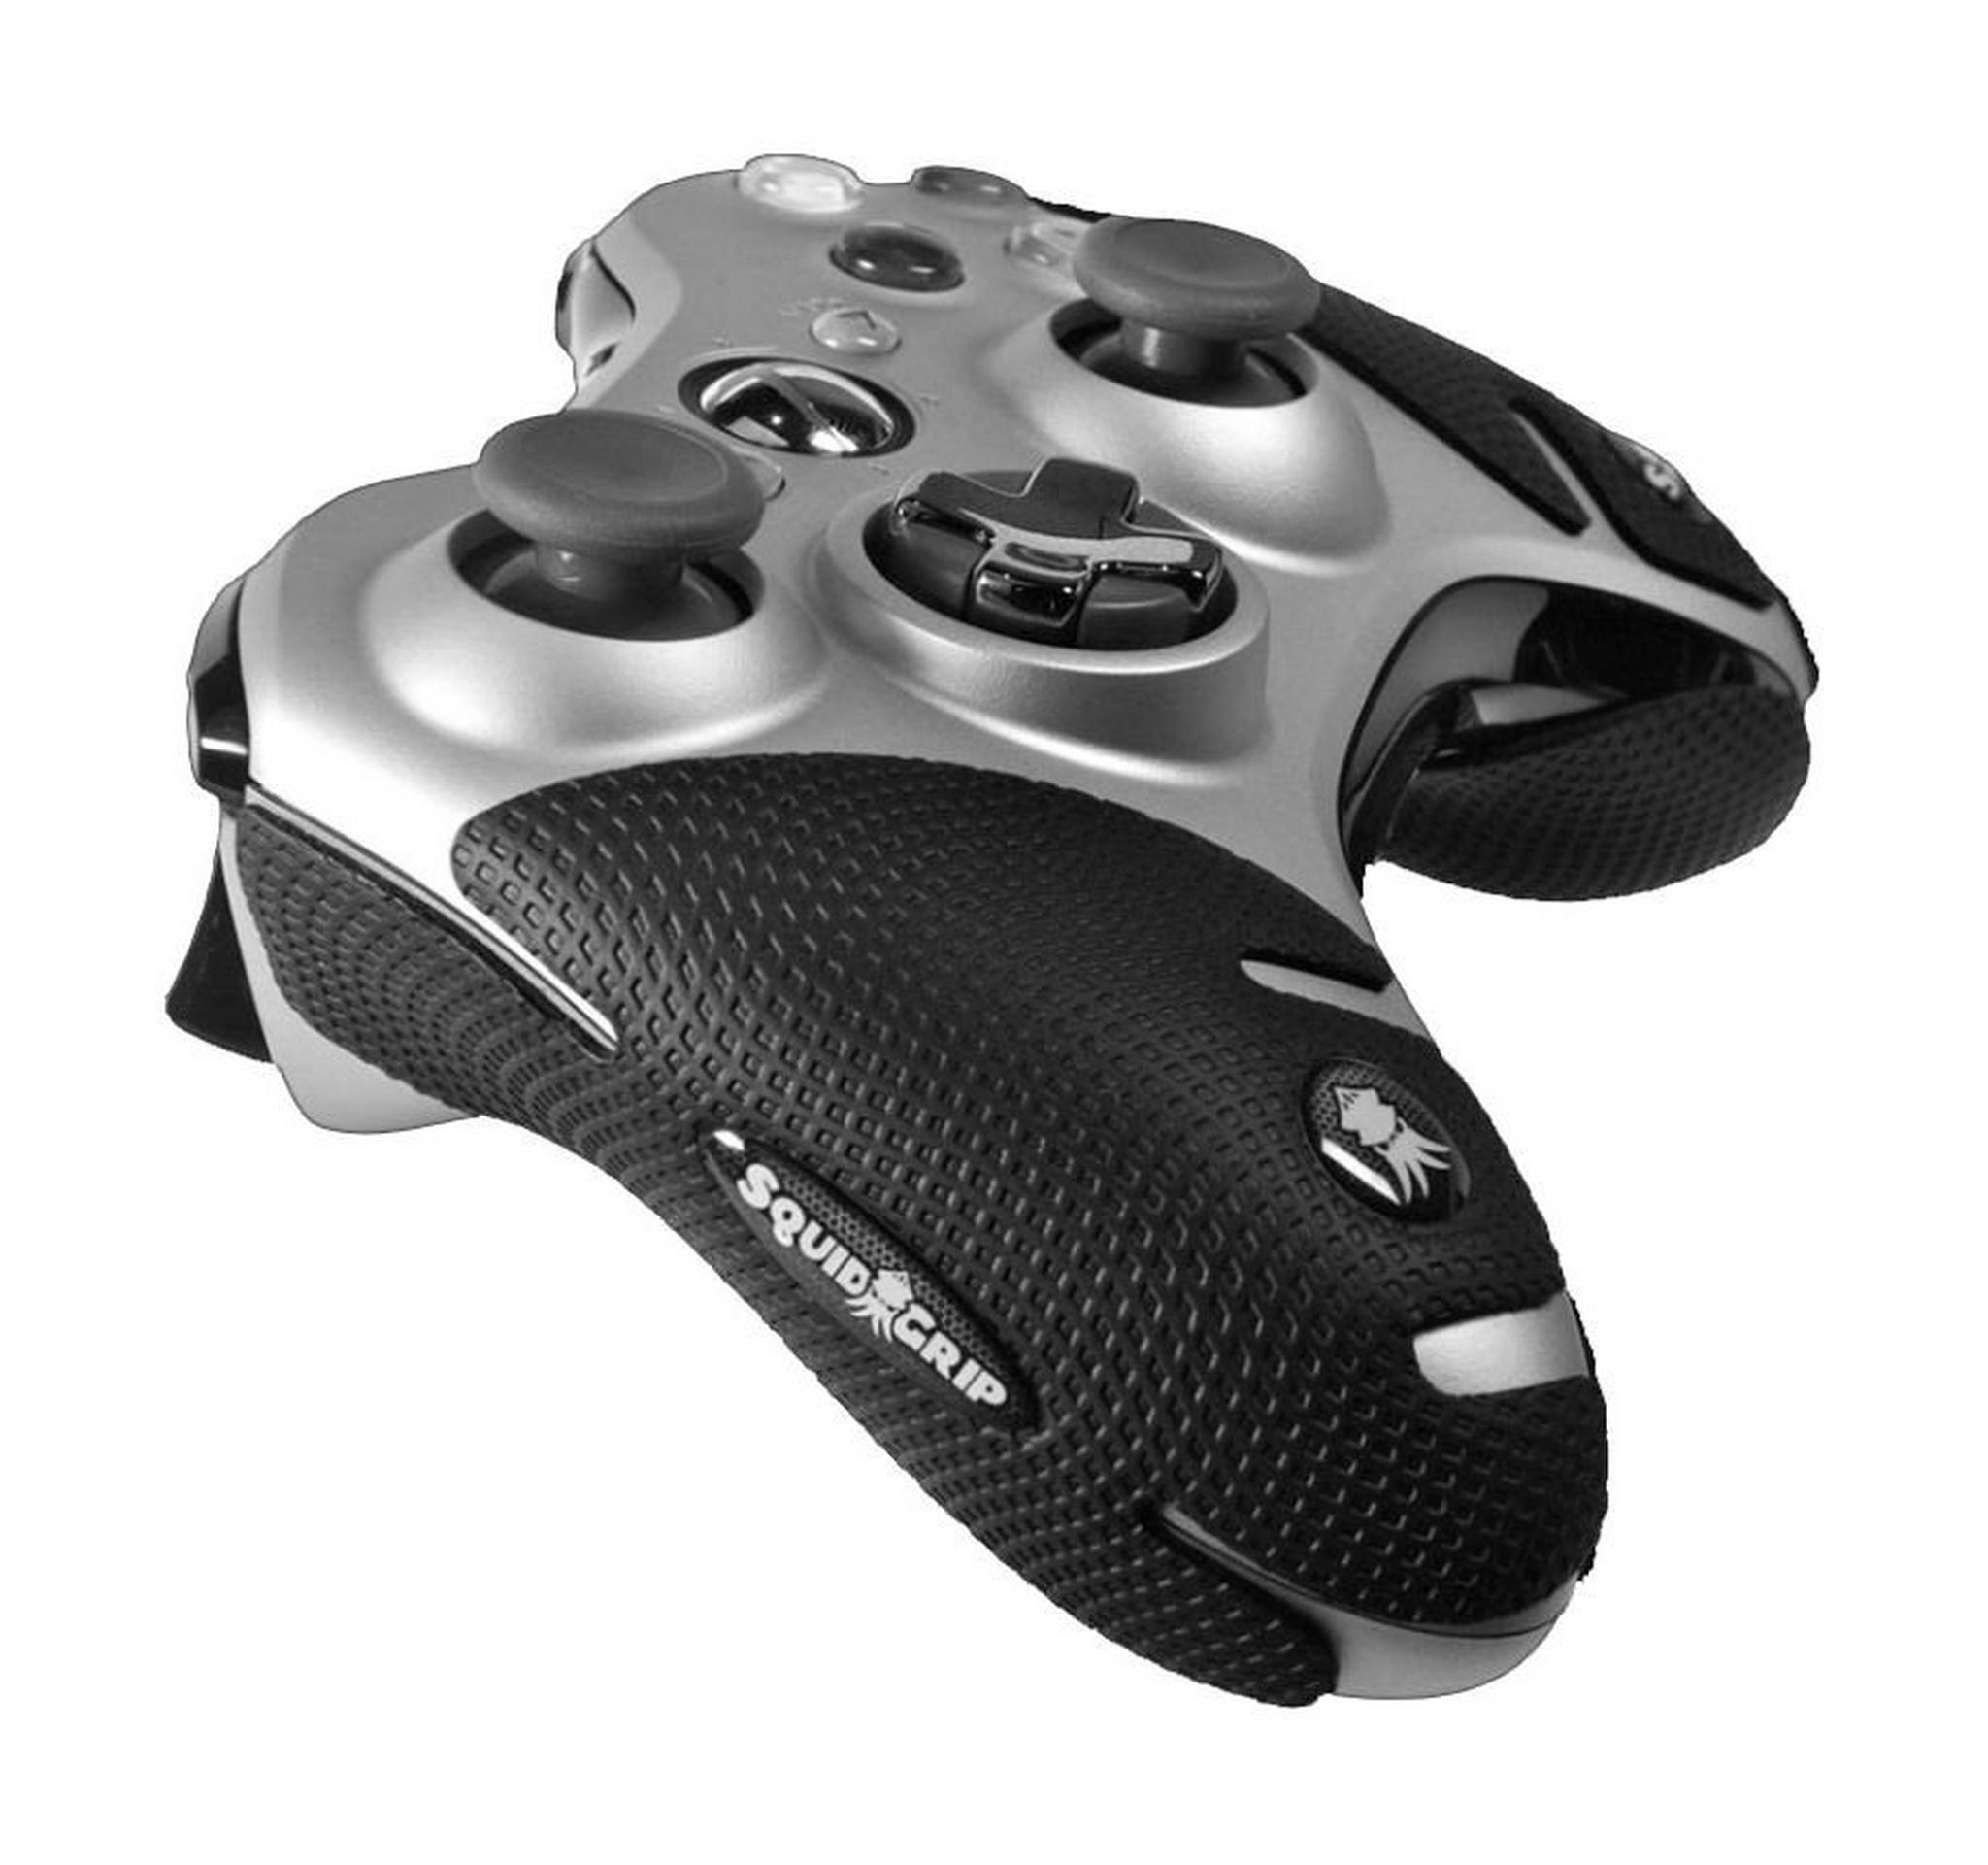 Squidgrip Wireless Controller for Xbox 360 - Black